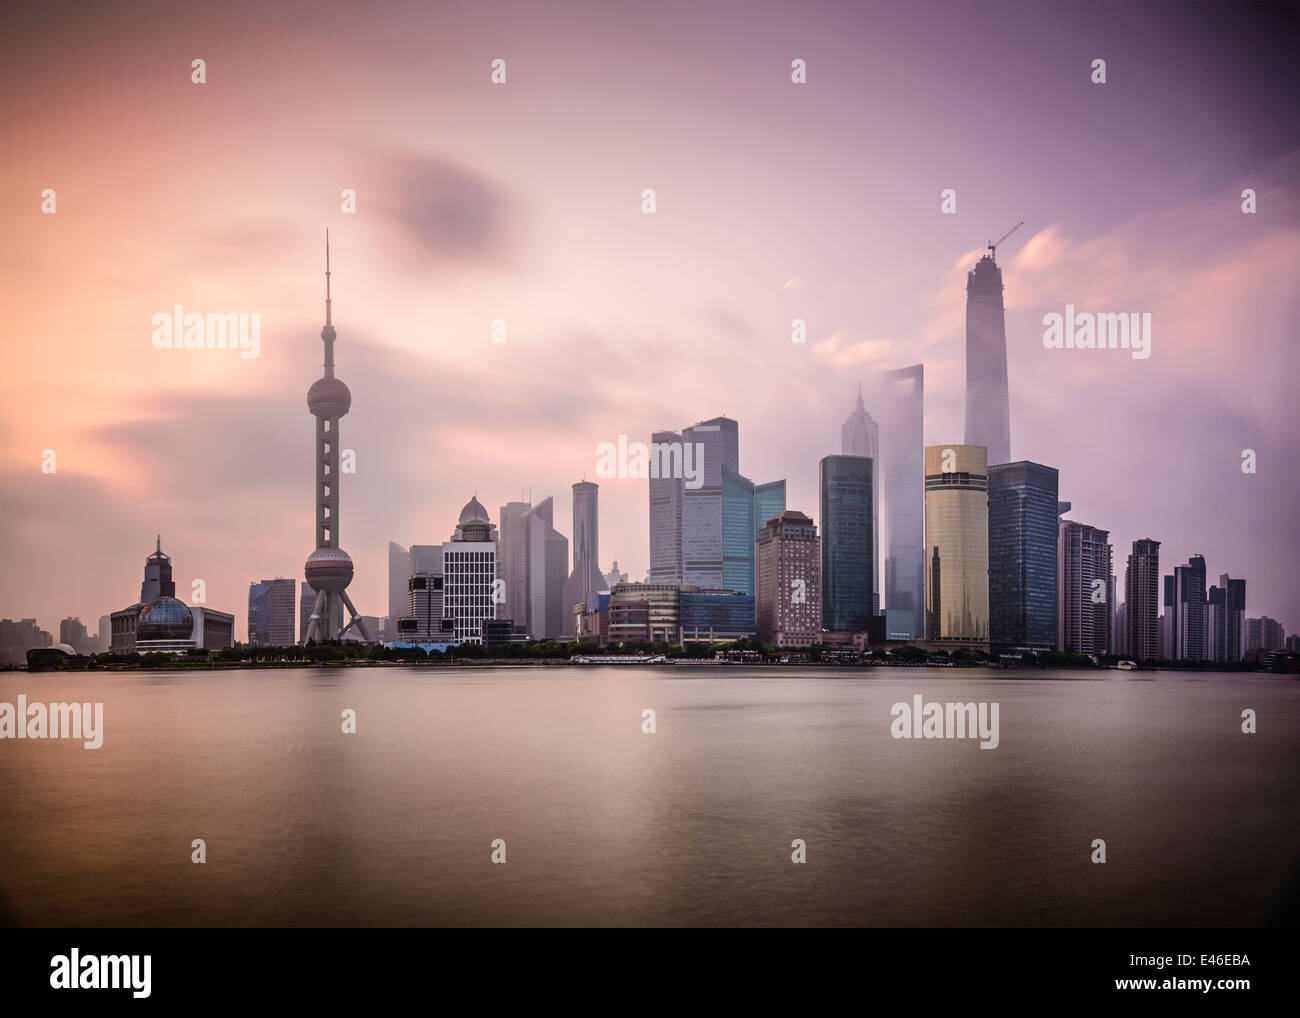 Shanghai, China cityscape viewed across the Huanpu River at dawn. Stock Photo